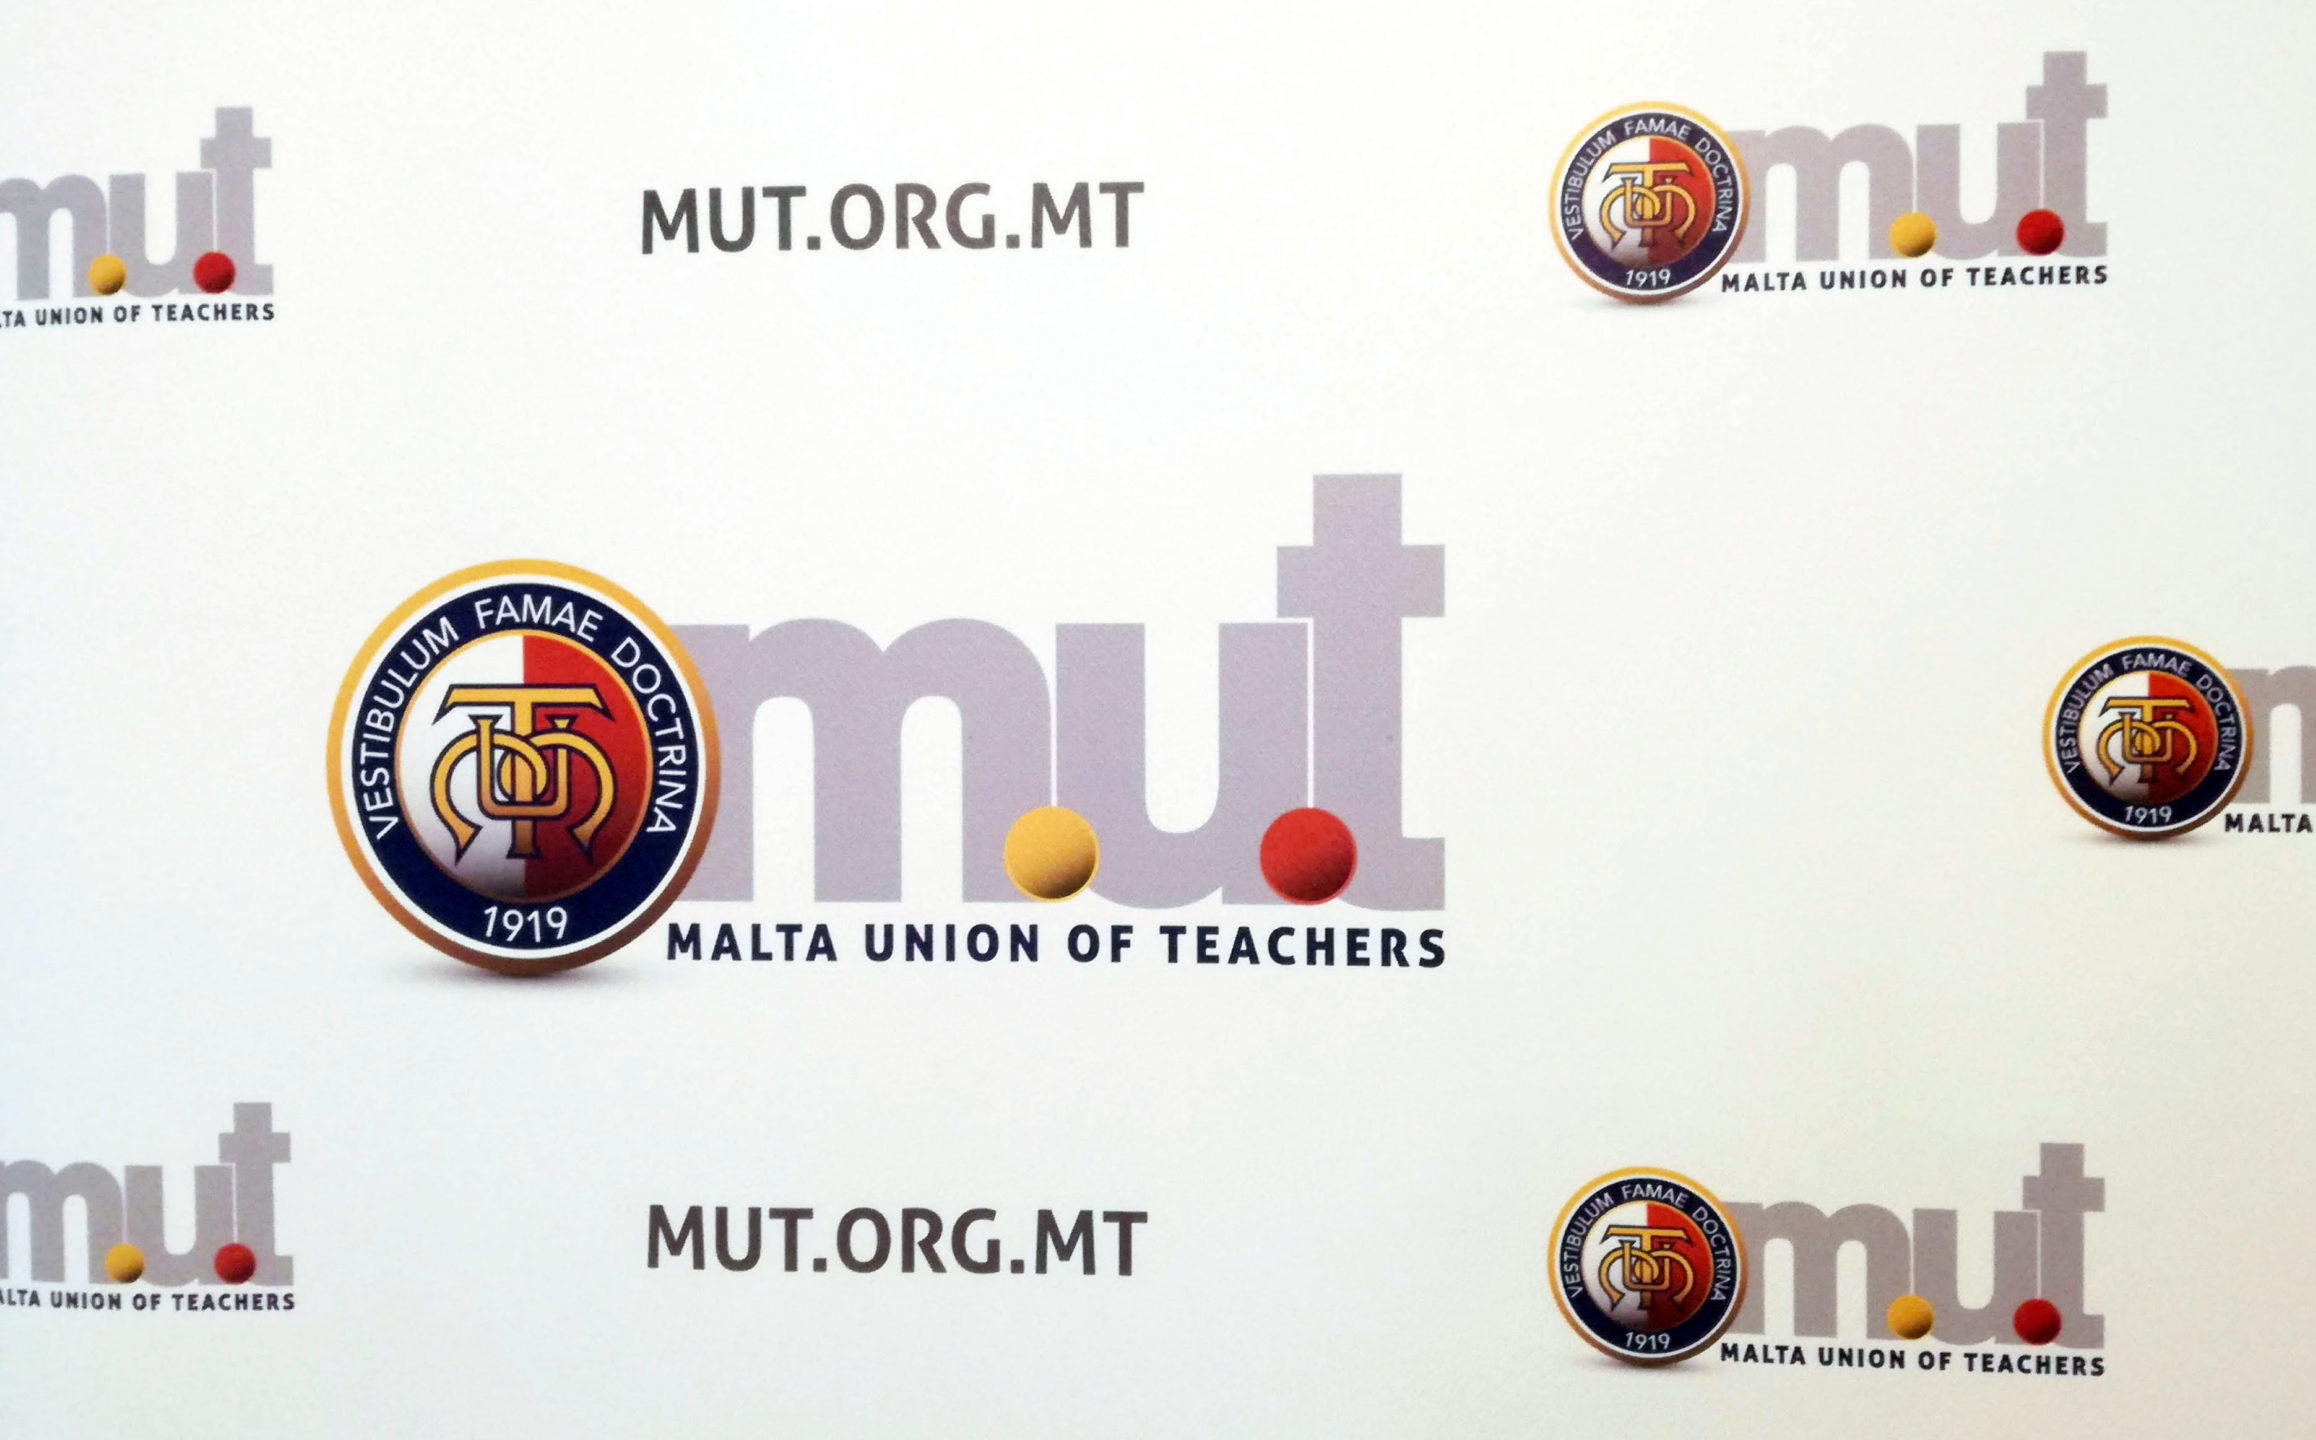 MUT condemns aggression in school and requests support for educators